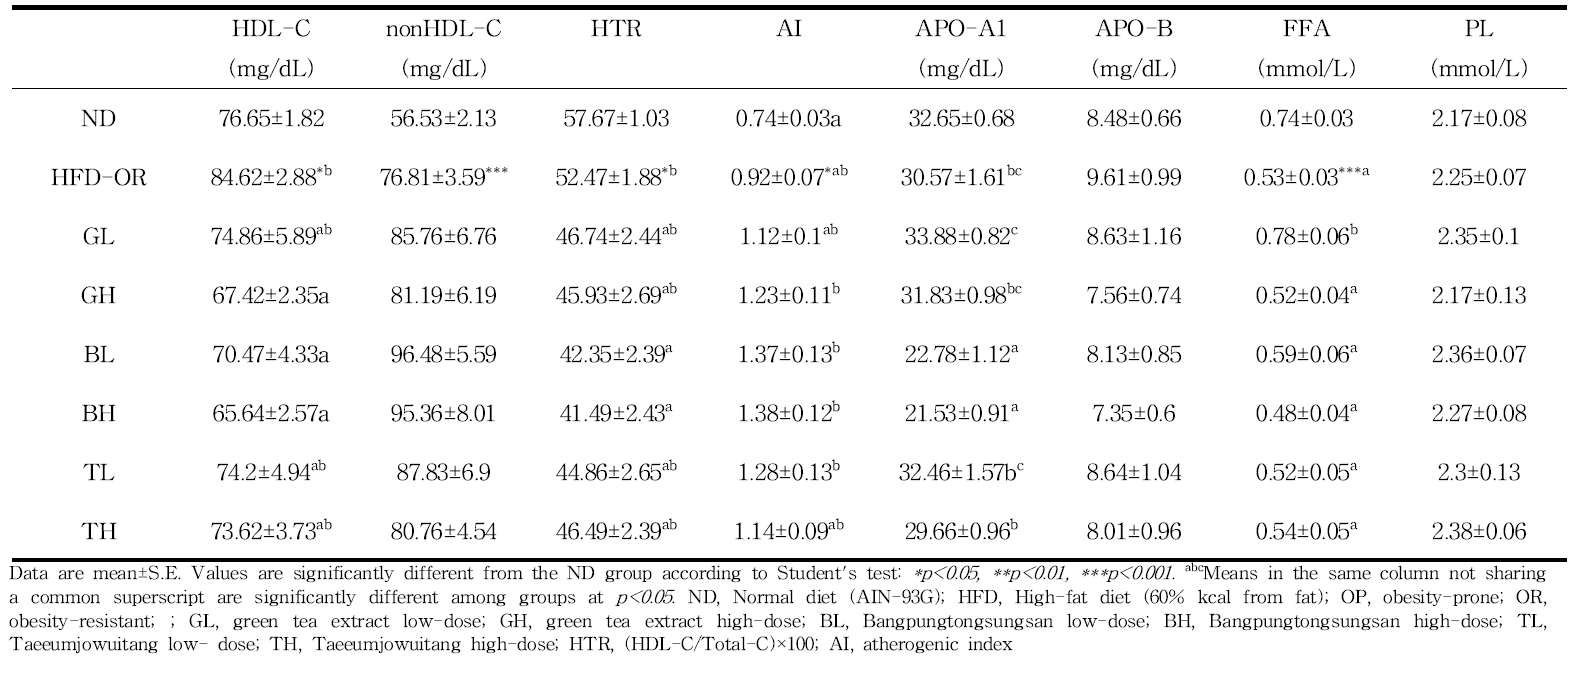 Effect of traditional medicinal prescription for 12 weeks on plasma lipid profiles in C57BL/6J mice fed high-fat diet (Comparison with HFD-OR group)